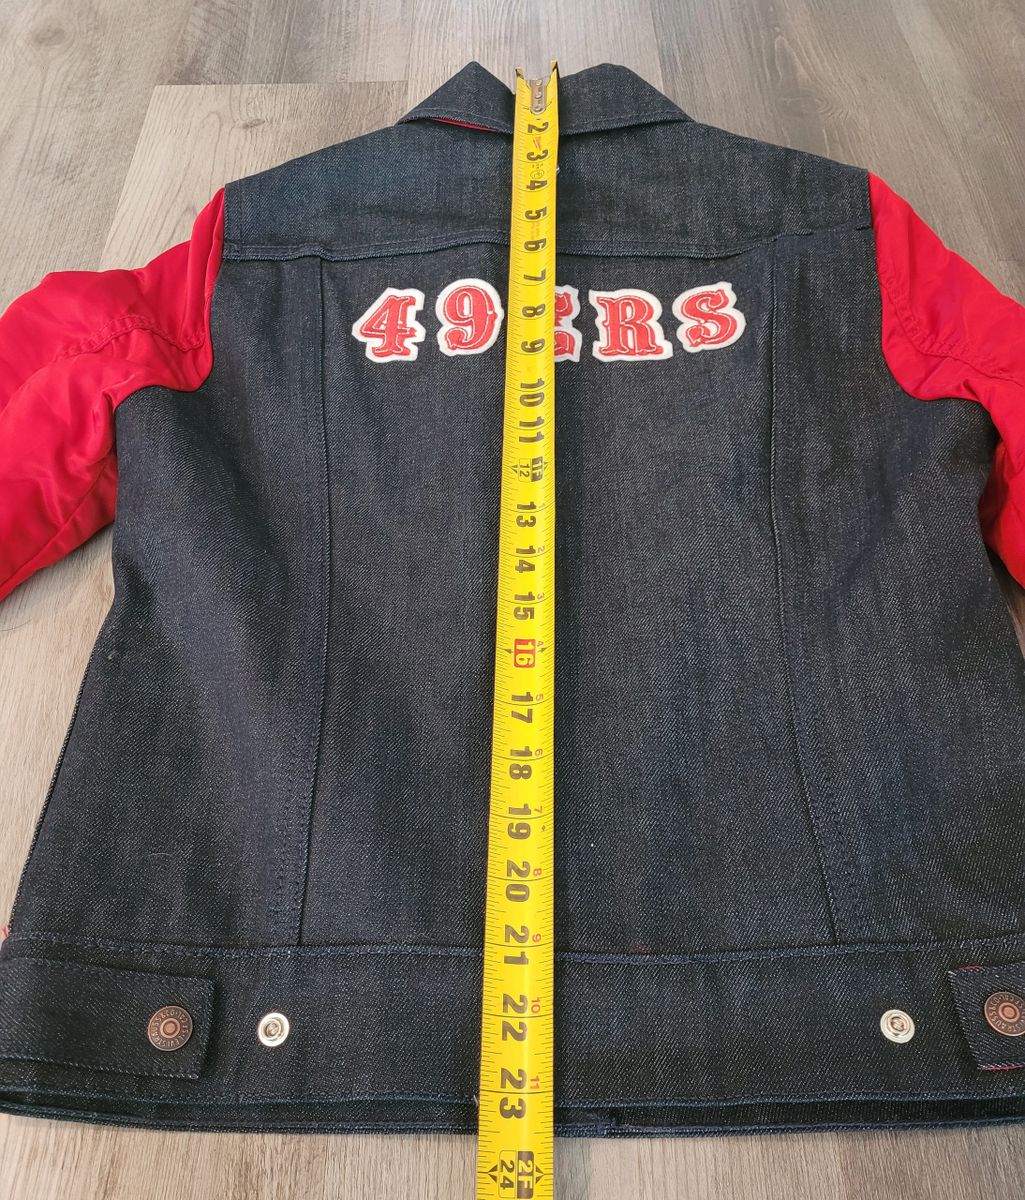 Authentic 49ers Women's Navy/Red Levi's Denim/Satin Jacket size XS w/ tags